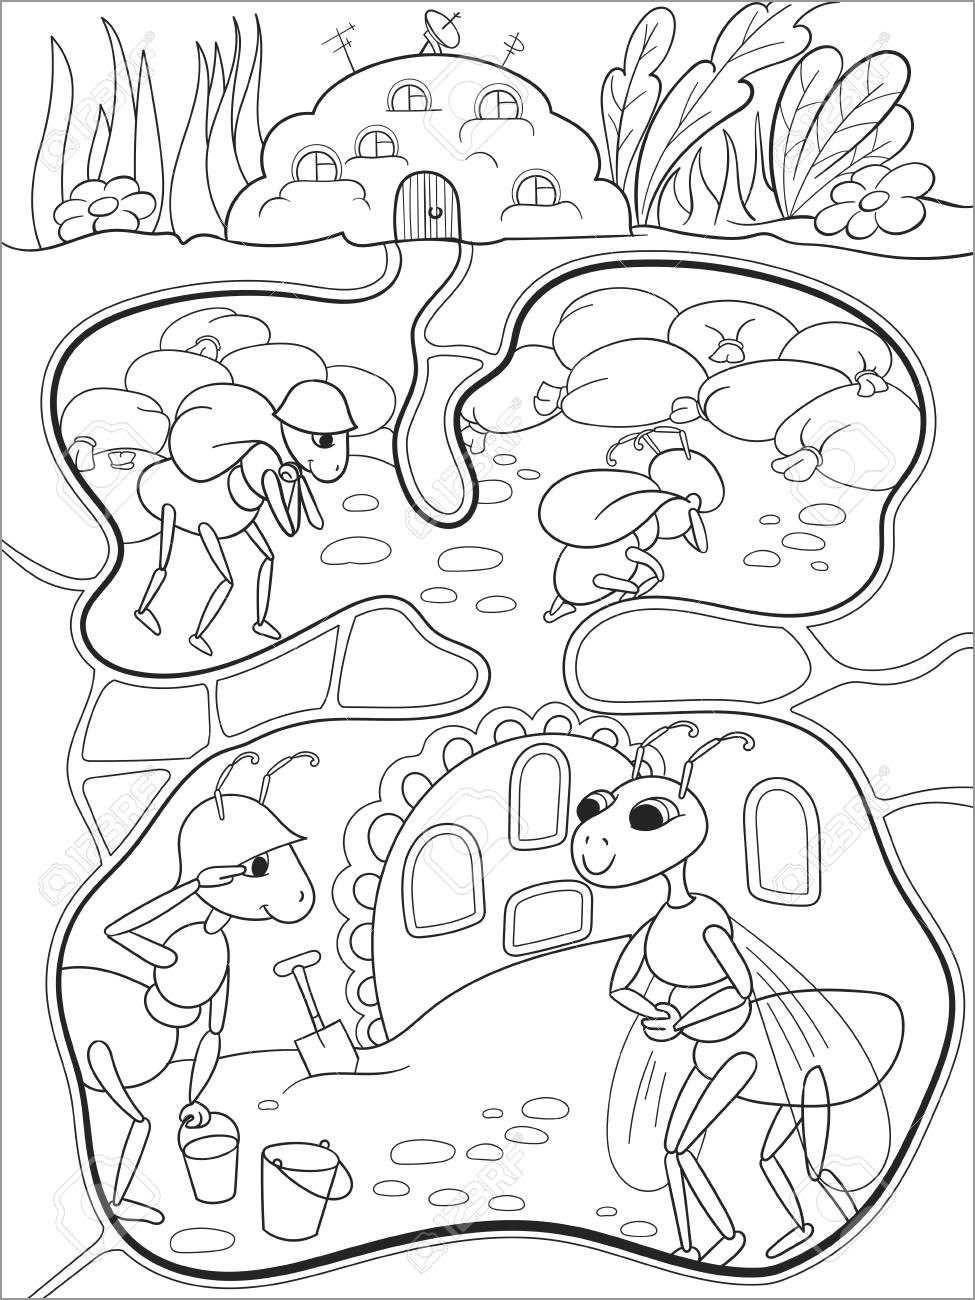 Ant Colony Coloring Page for Kids